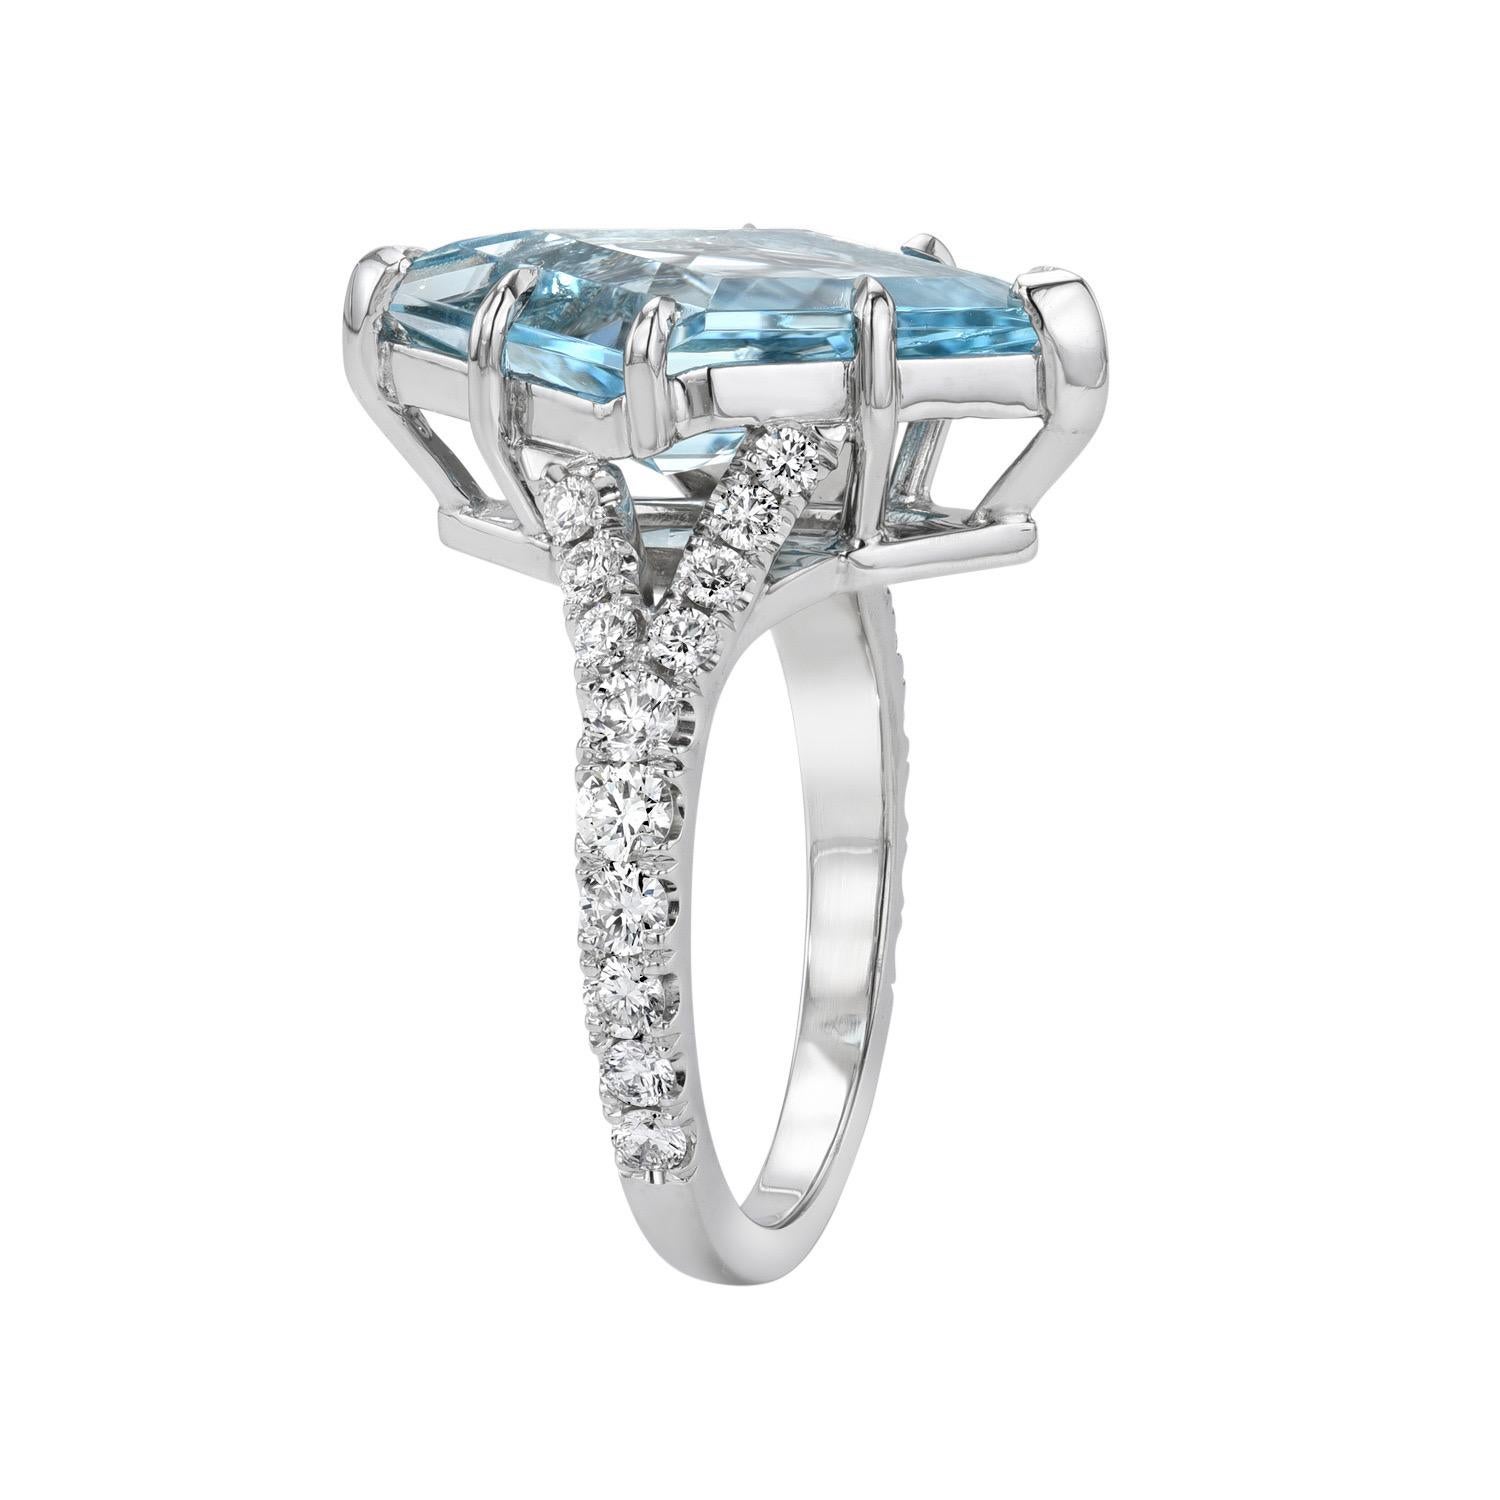 Unique 3.77 carat Aquamarine platinum ring, decorated with a total of 0.63 carat round brilliant, collection diamonds.
Ring size 6. Resizing is complementary upon request.
Crafted by extremely skilled hands in the USA.
Returns are accepted and paid